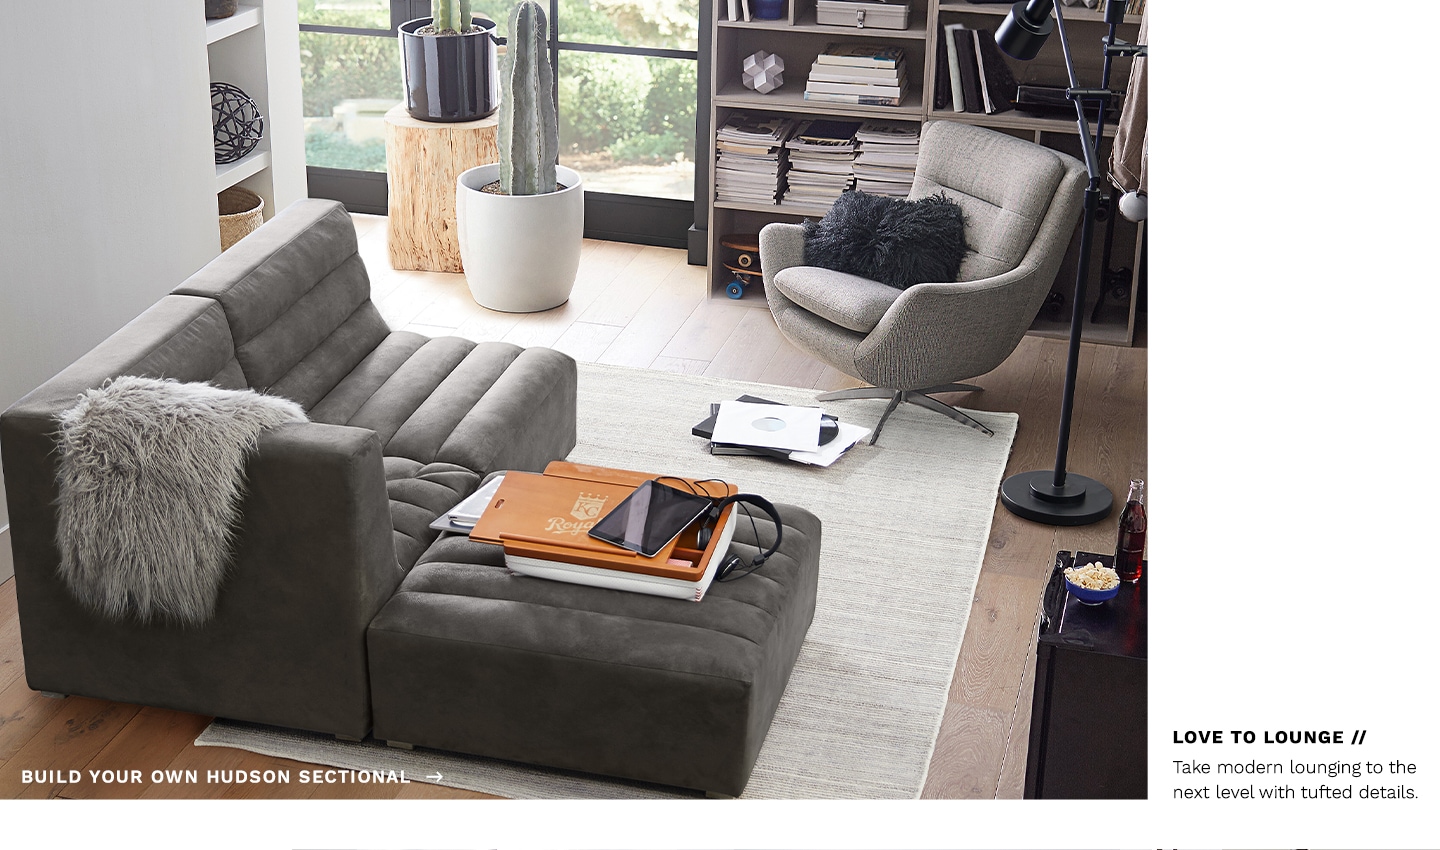 Build Your Own Hudson Sectional 